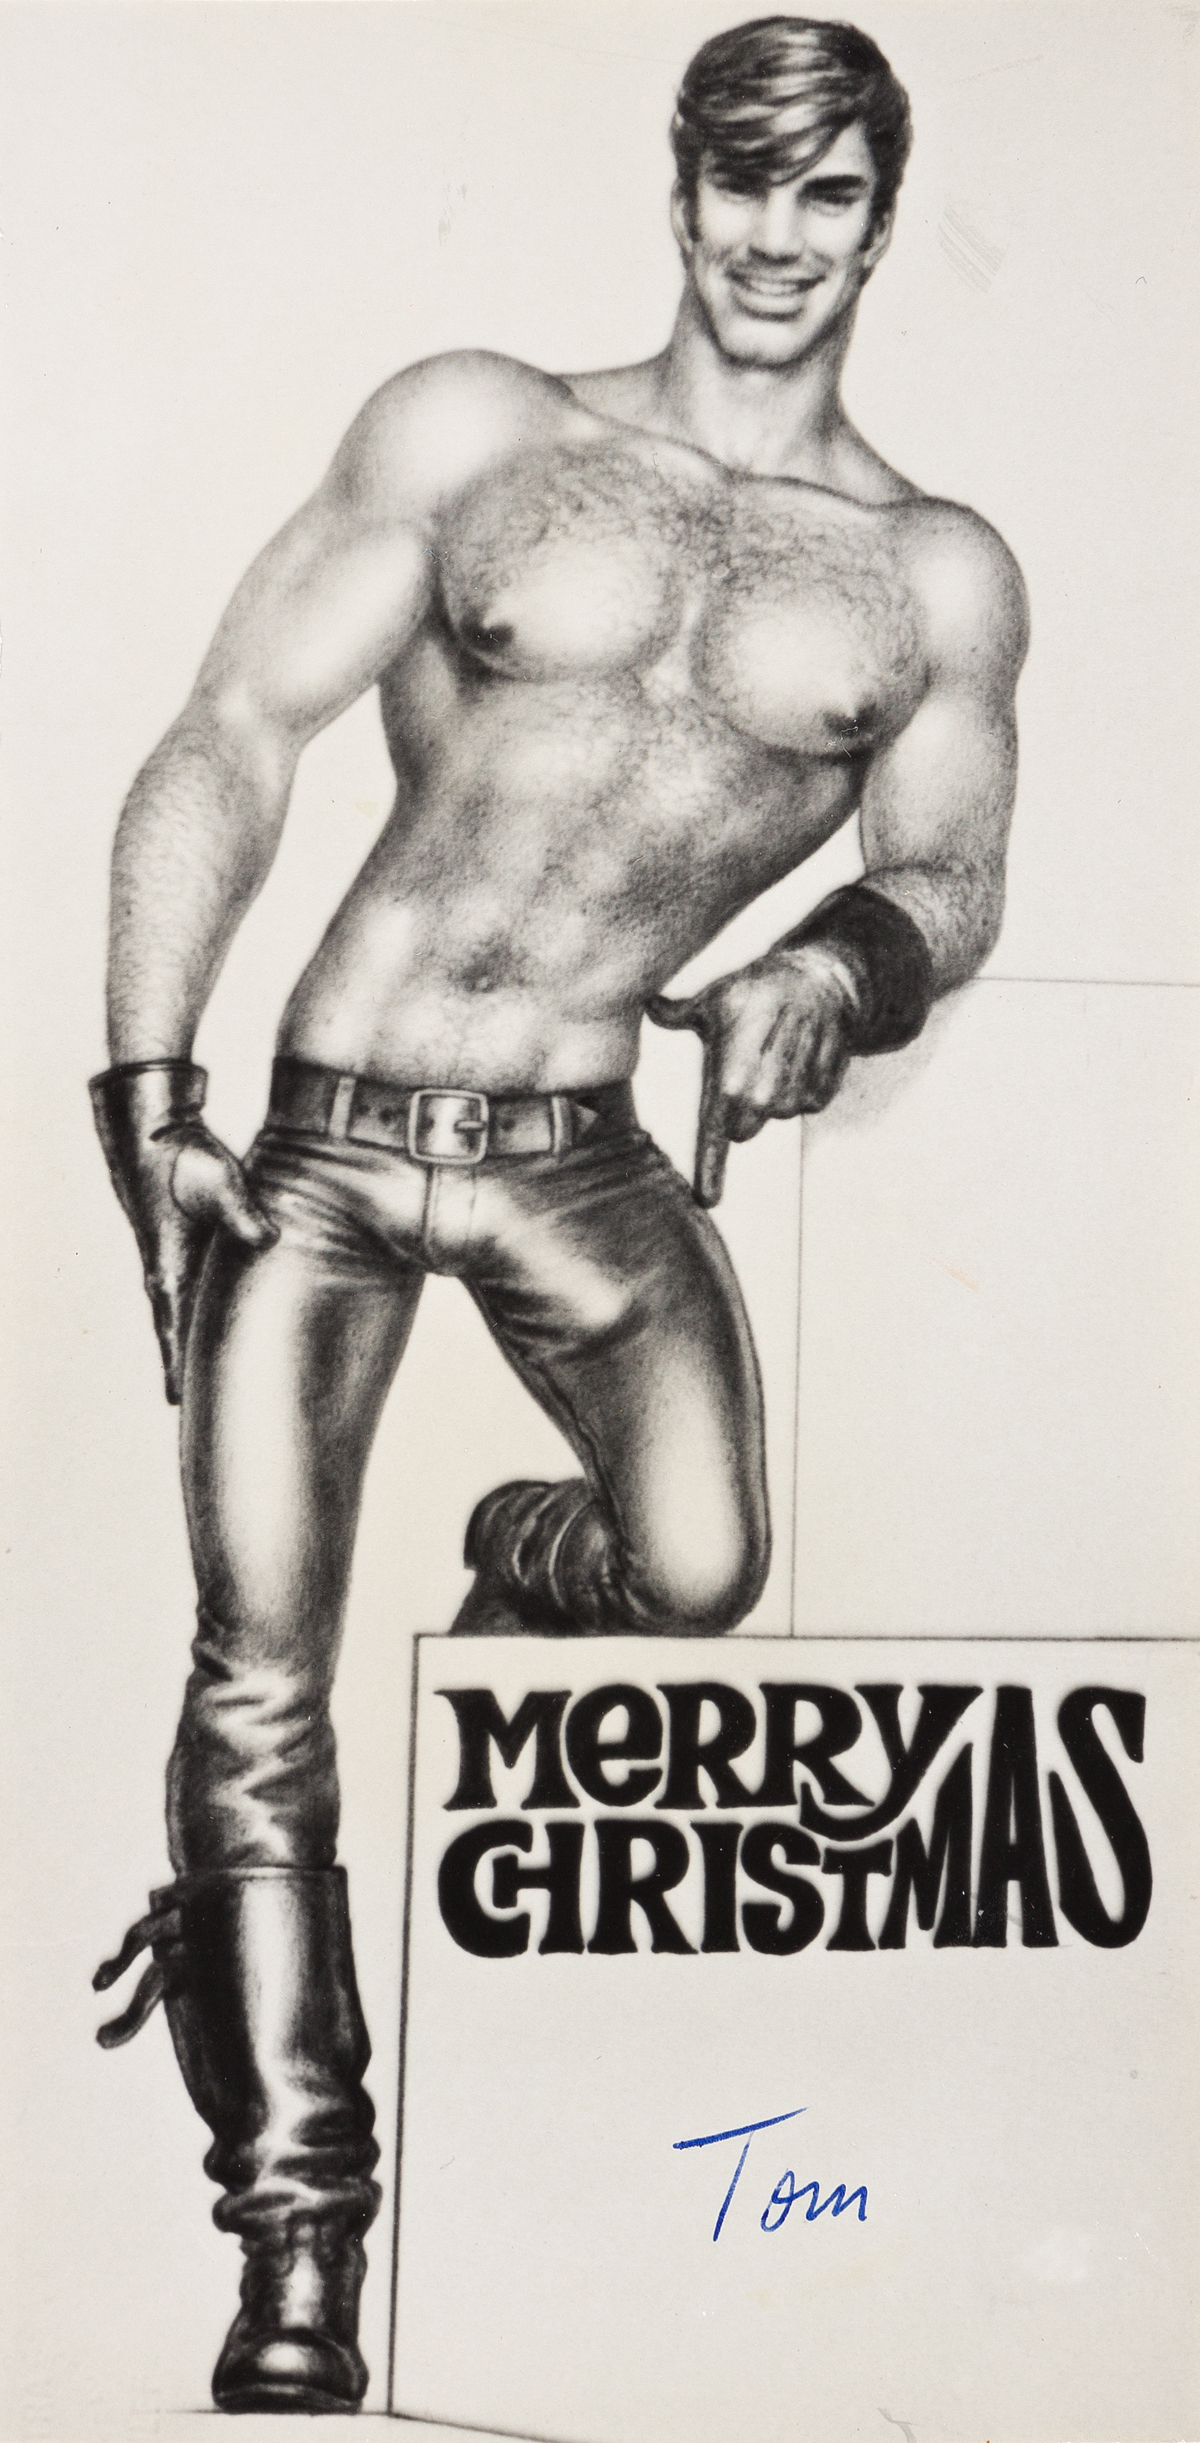 TOM OF FINLAND (1920-1991) Two Photographs Signed, Tom, each a reproduction of one of his graphite drawings showing a shirtless man i